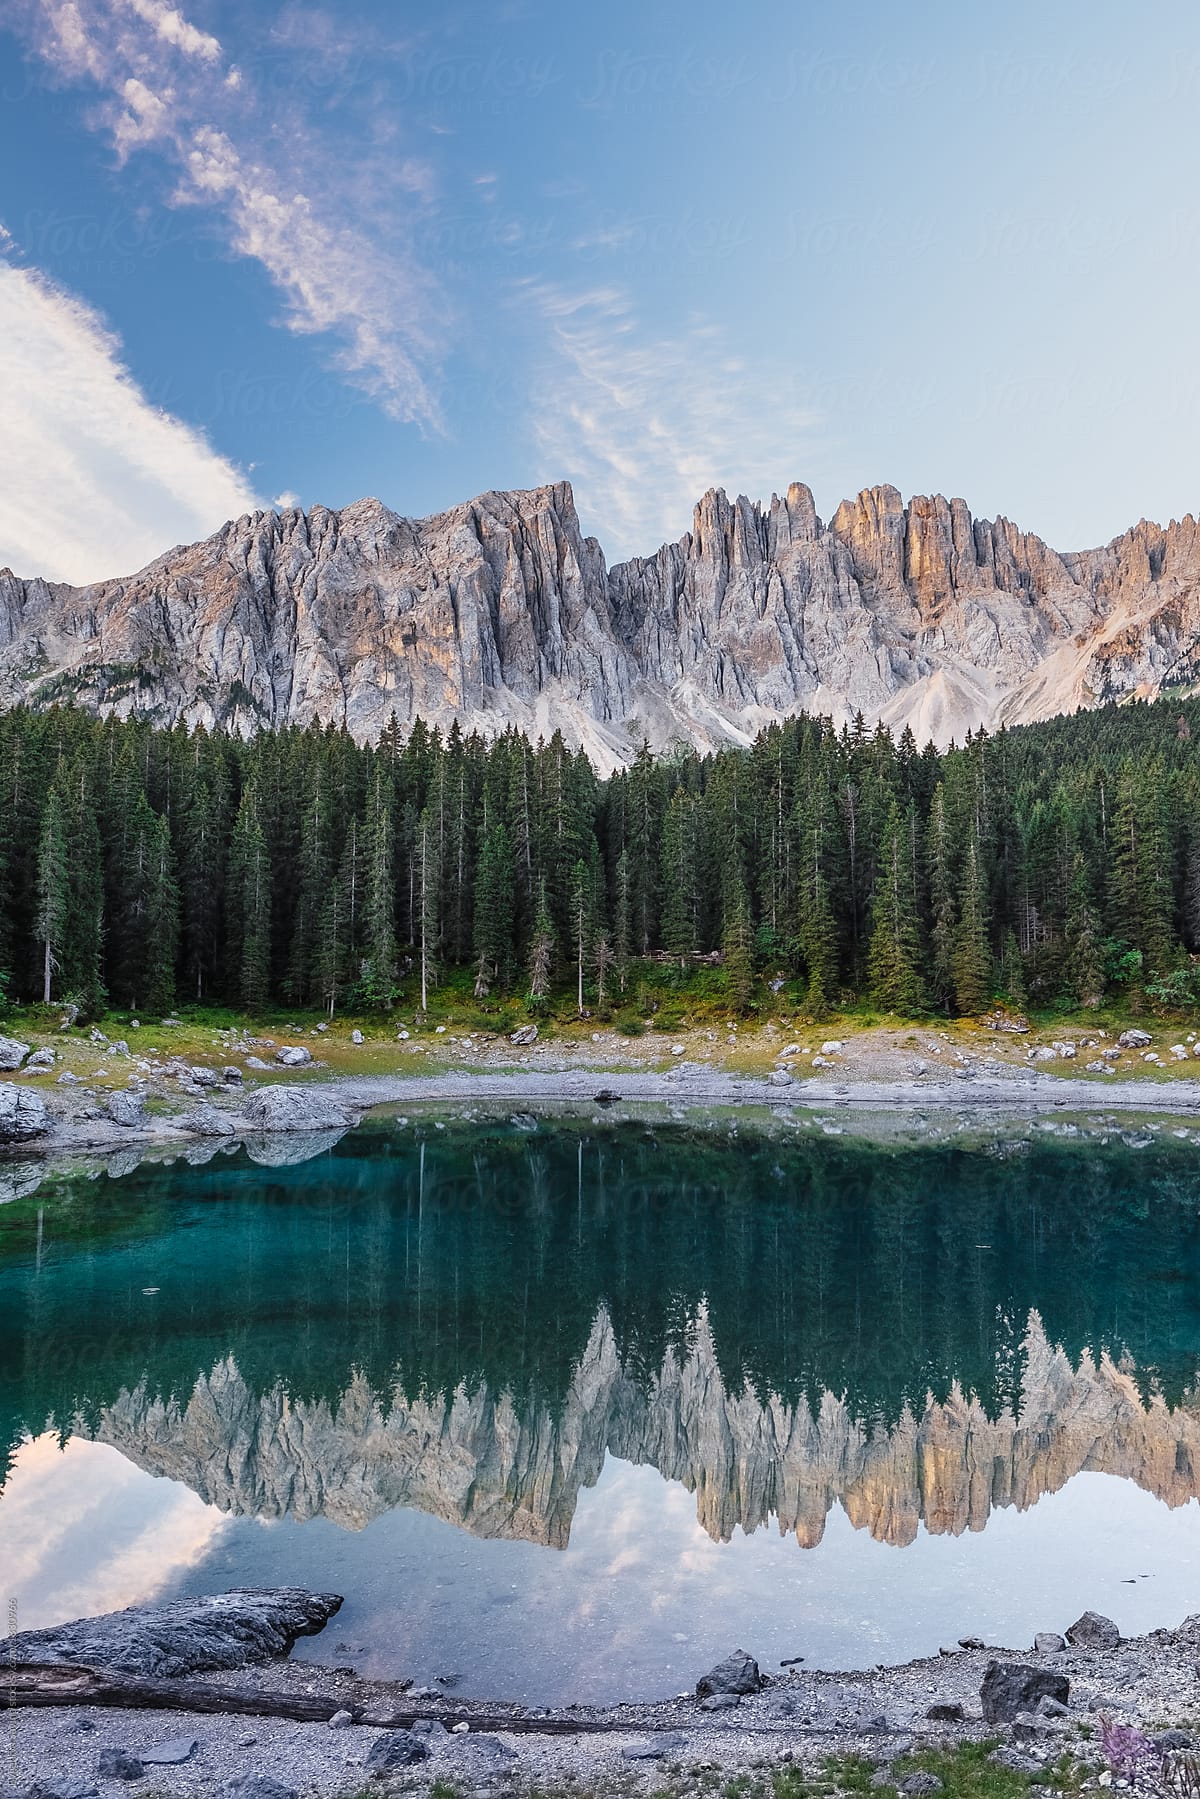 An italian mountain crystal clear lake with mountains at the background and still calm bank at the front